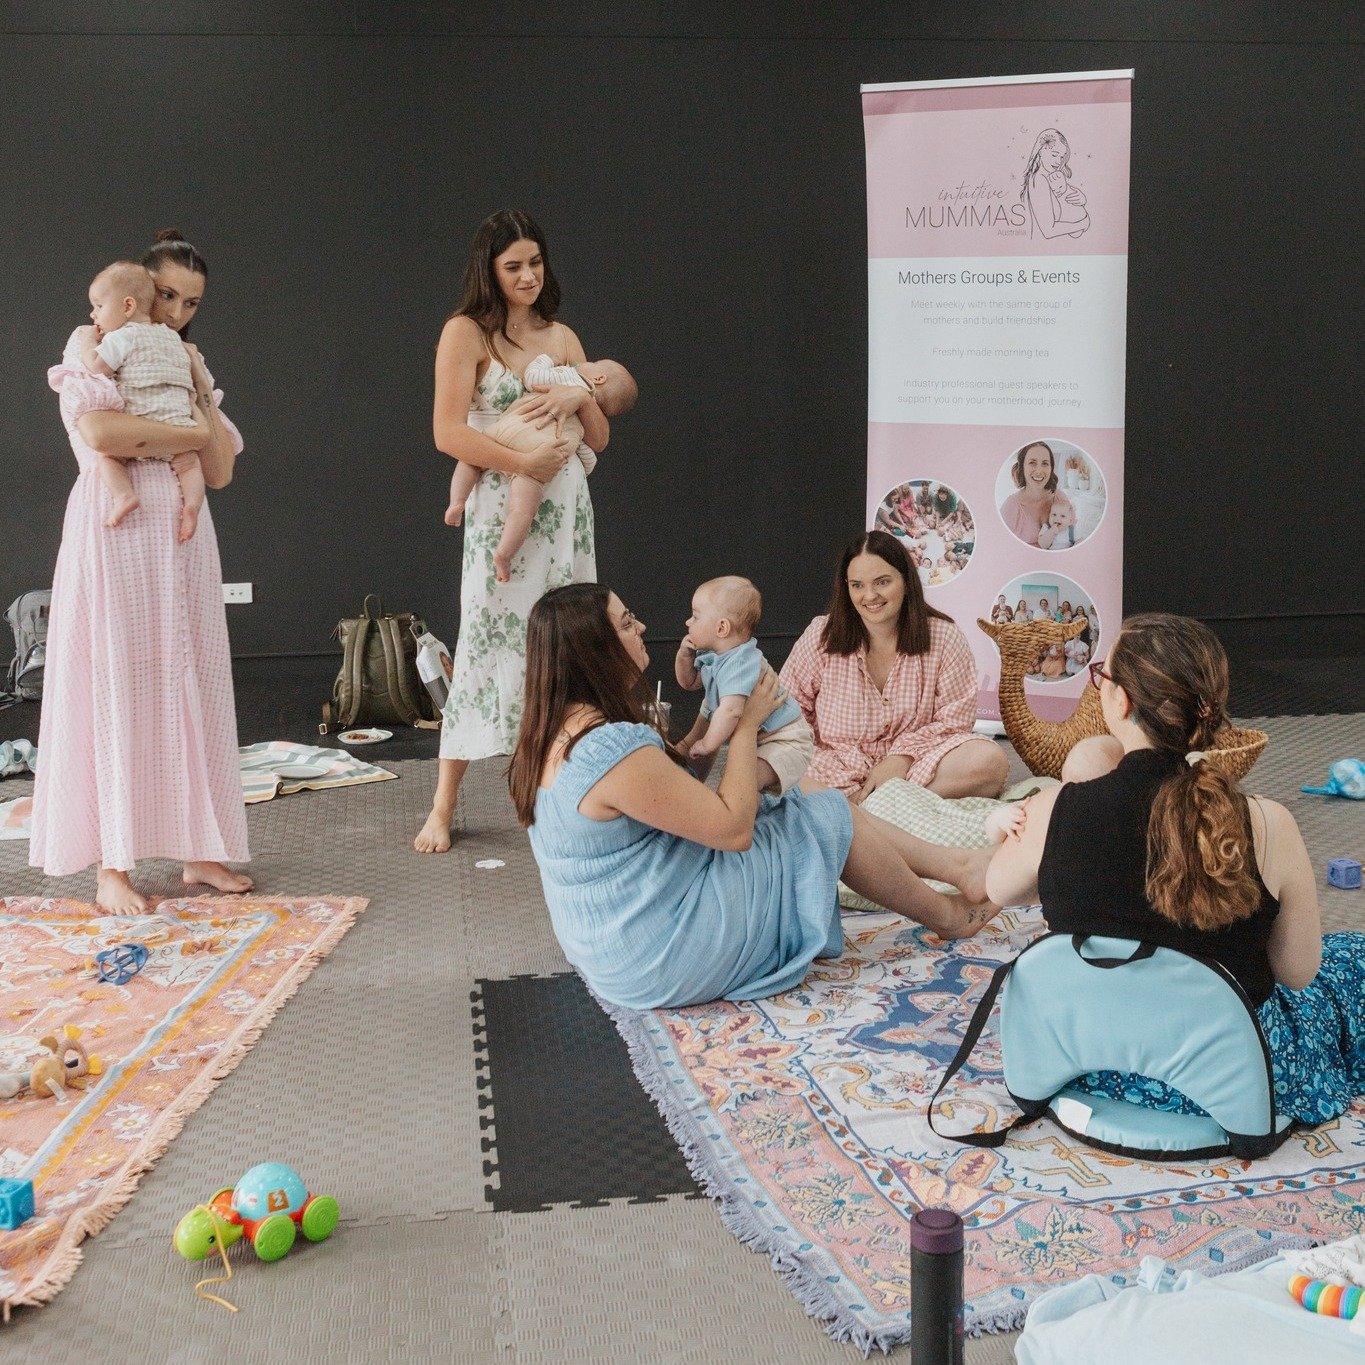 Intuitive Mummas: where authenticity meets motherhood. Our groups celebrate real mums navigating real life, sharing genuine experiences, emotions, and connections. We embrace the beautiful messiness and joy of the motherhood journey, weaving together